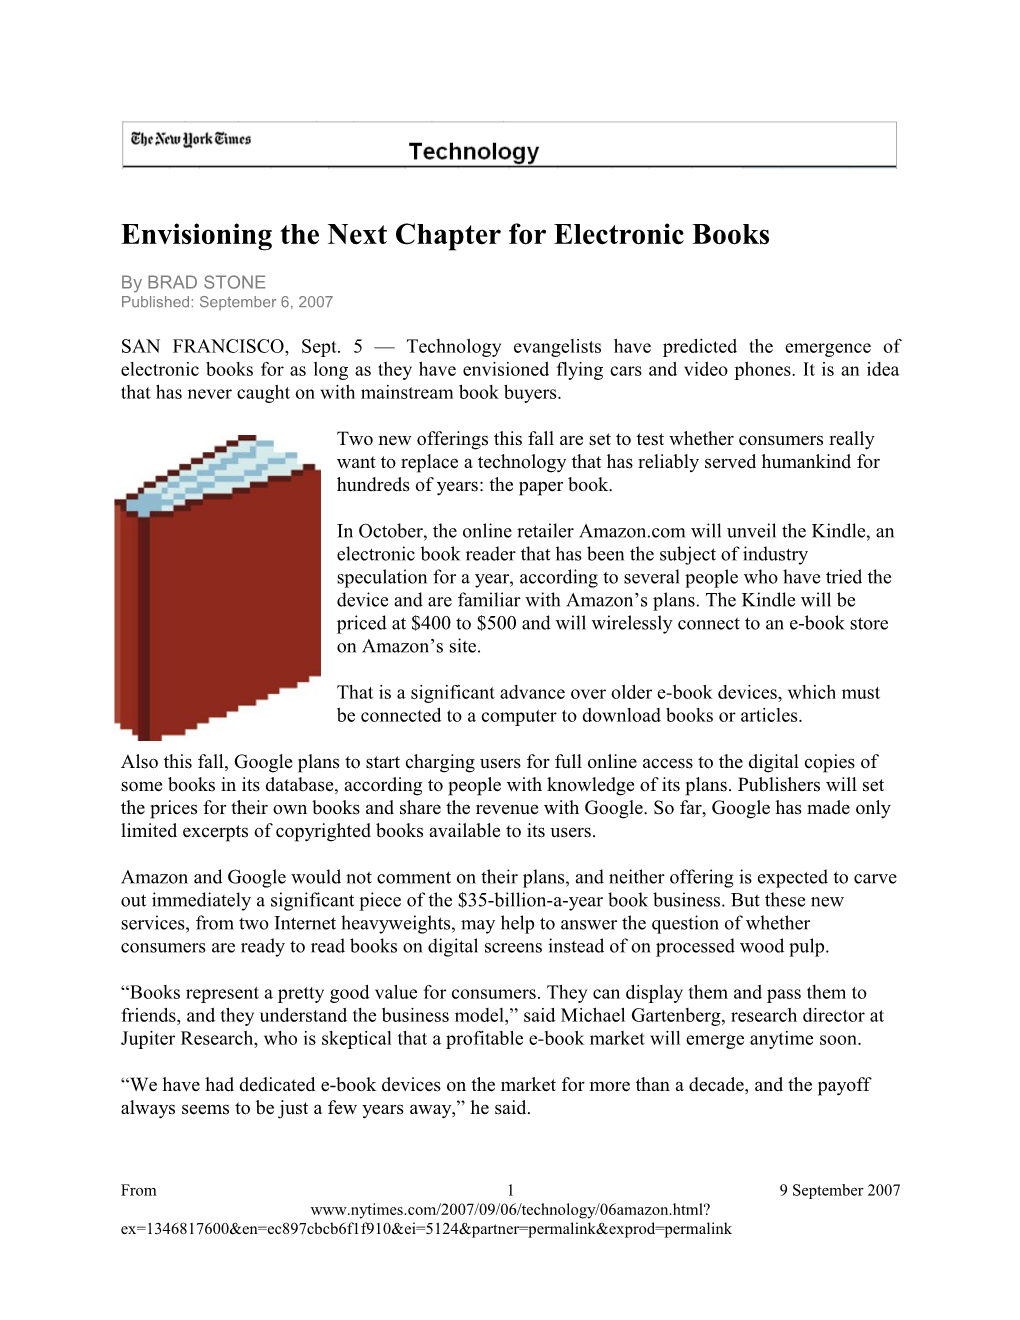 Envisioning the Next Chapter for Electronic Books